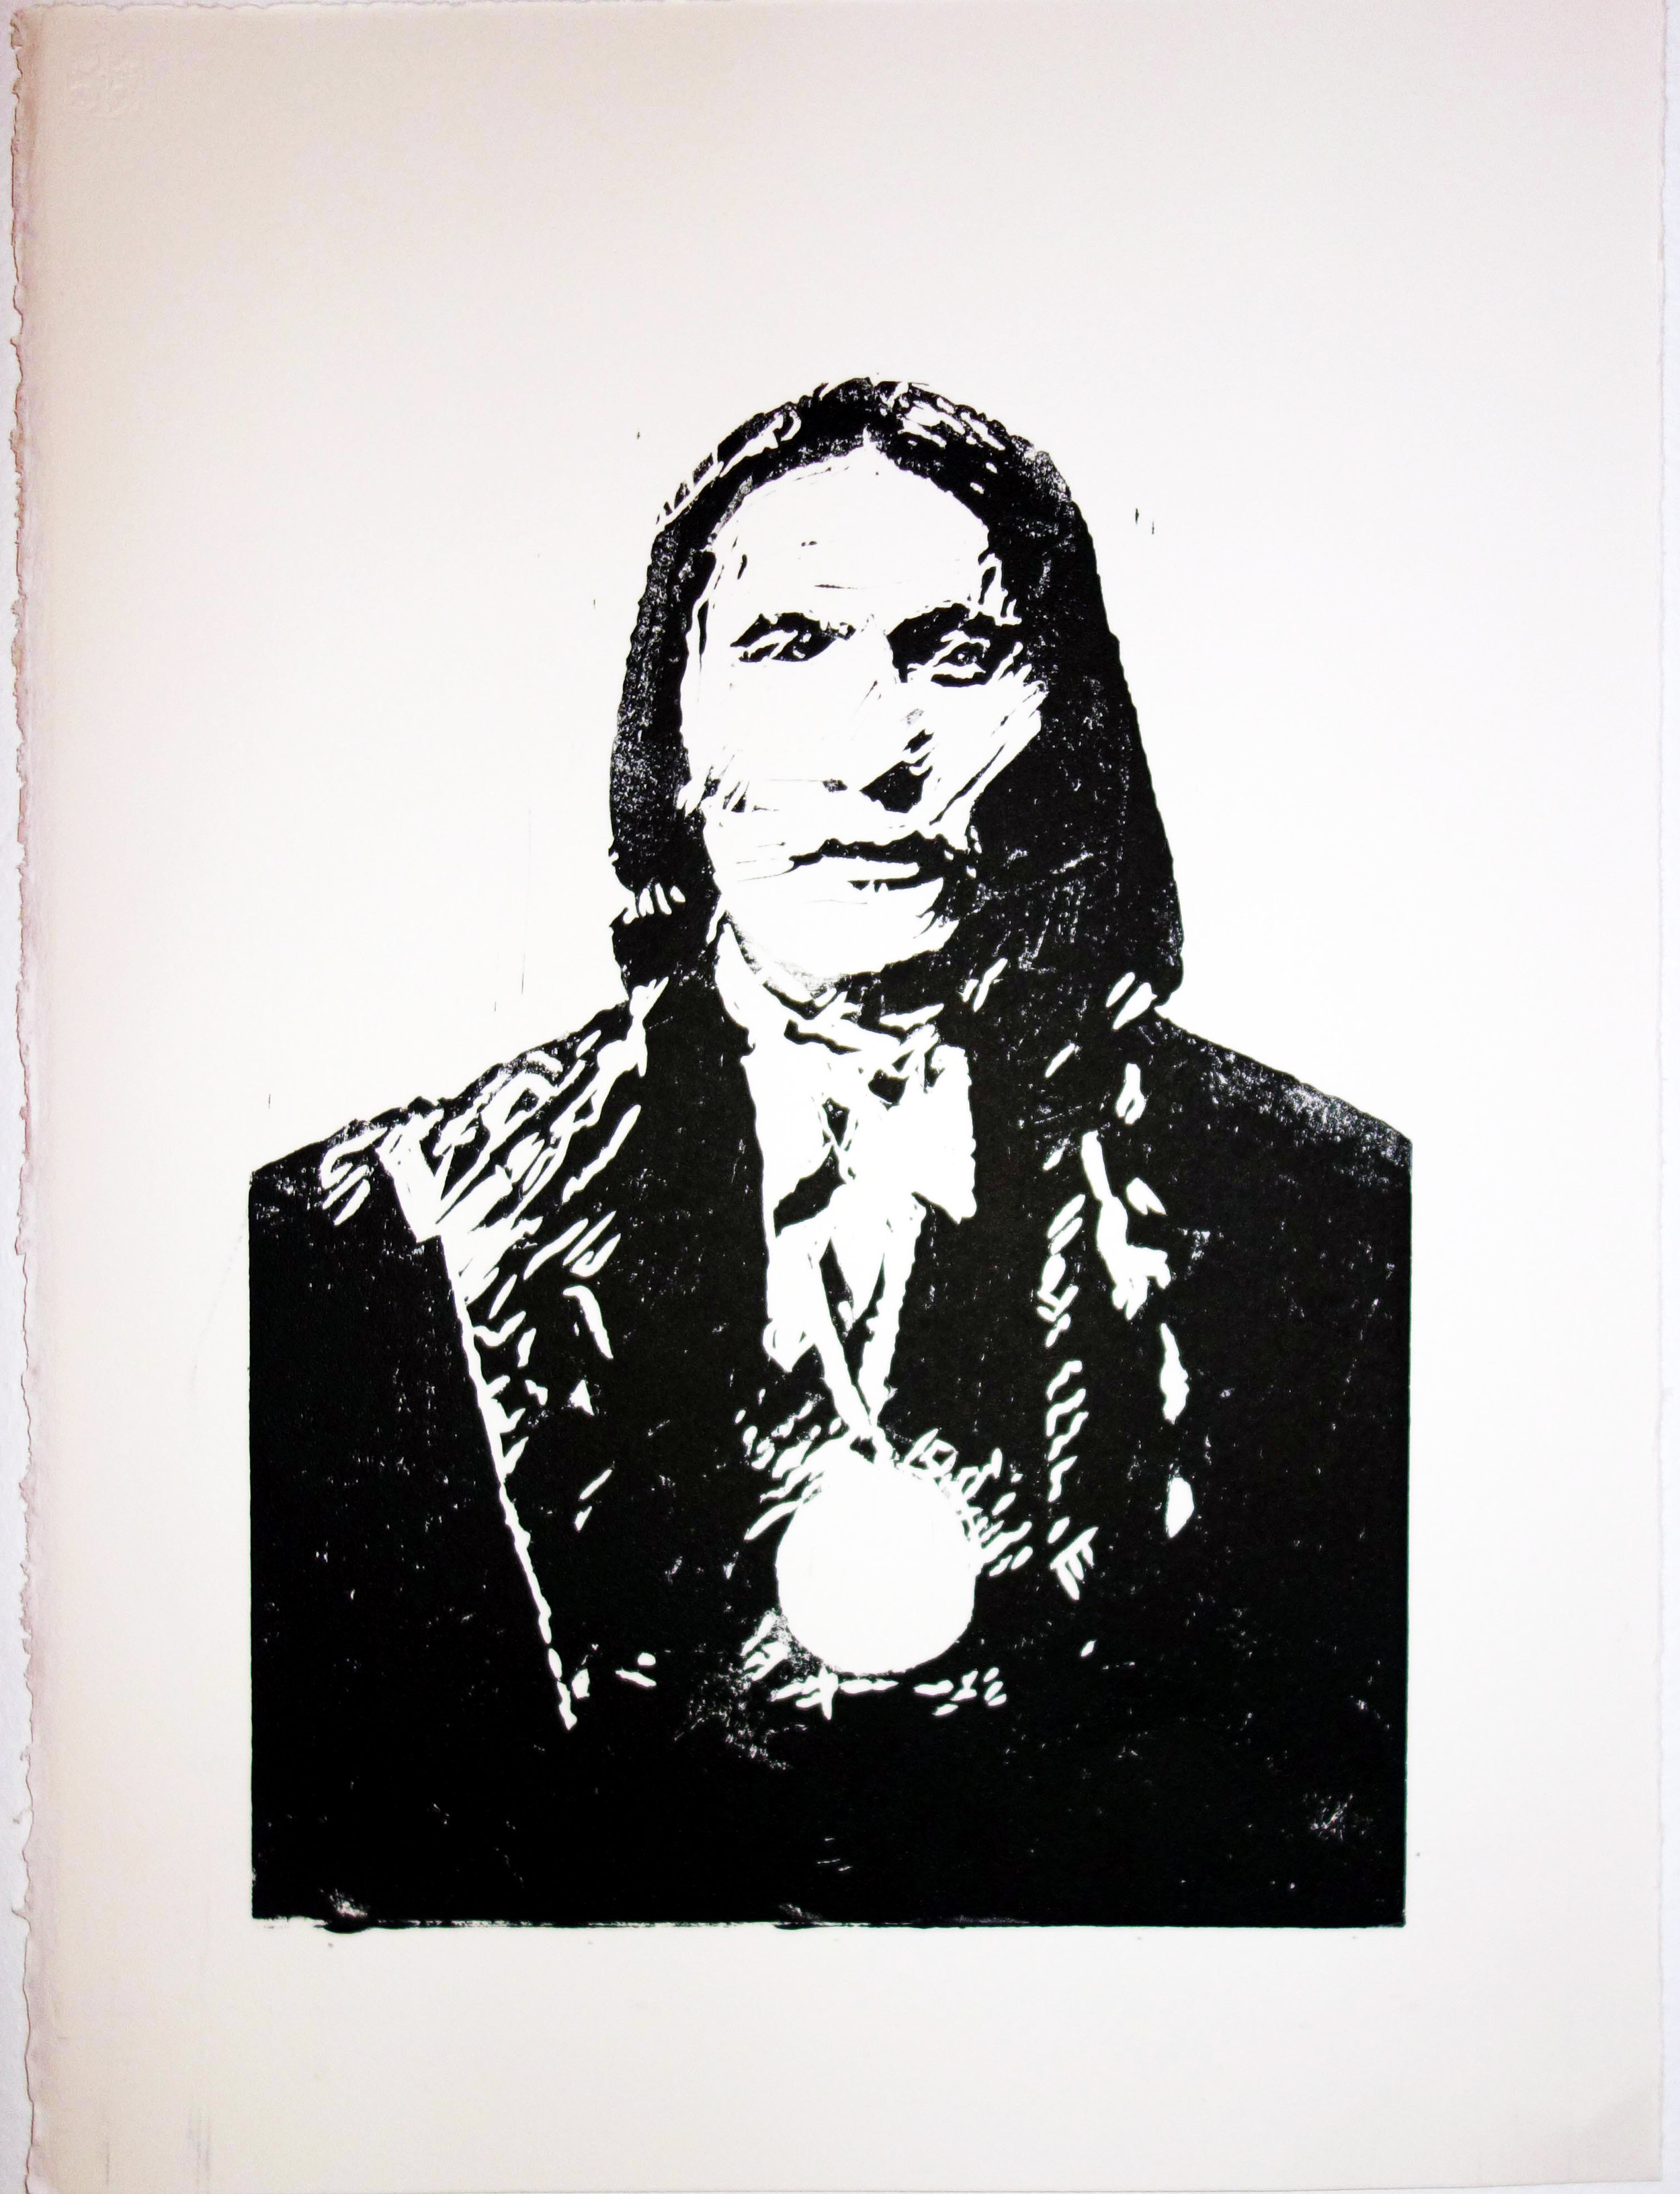 Hauglid_Martin_1_Protection_linoprint on paper_15x11 inches.JPG